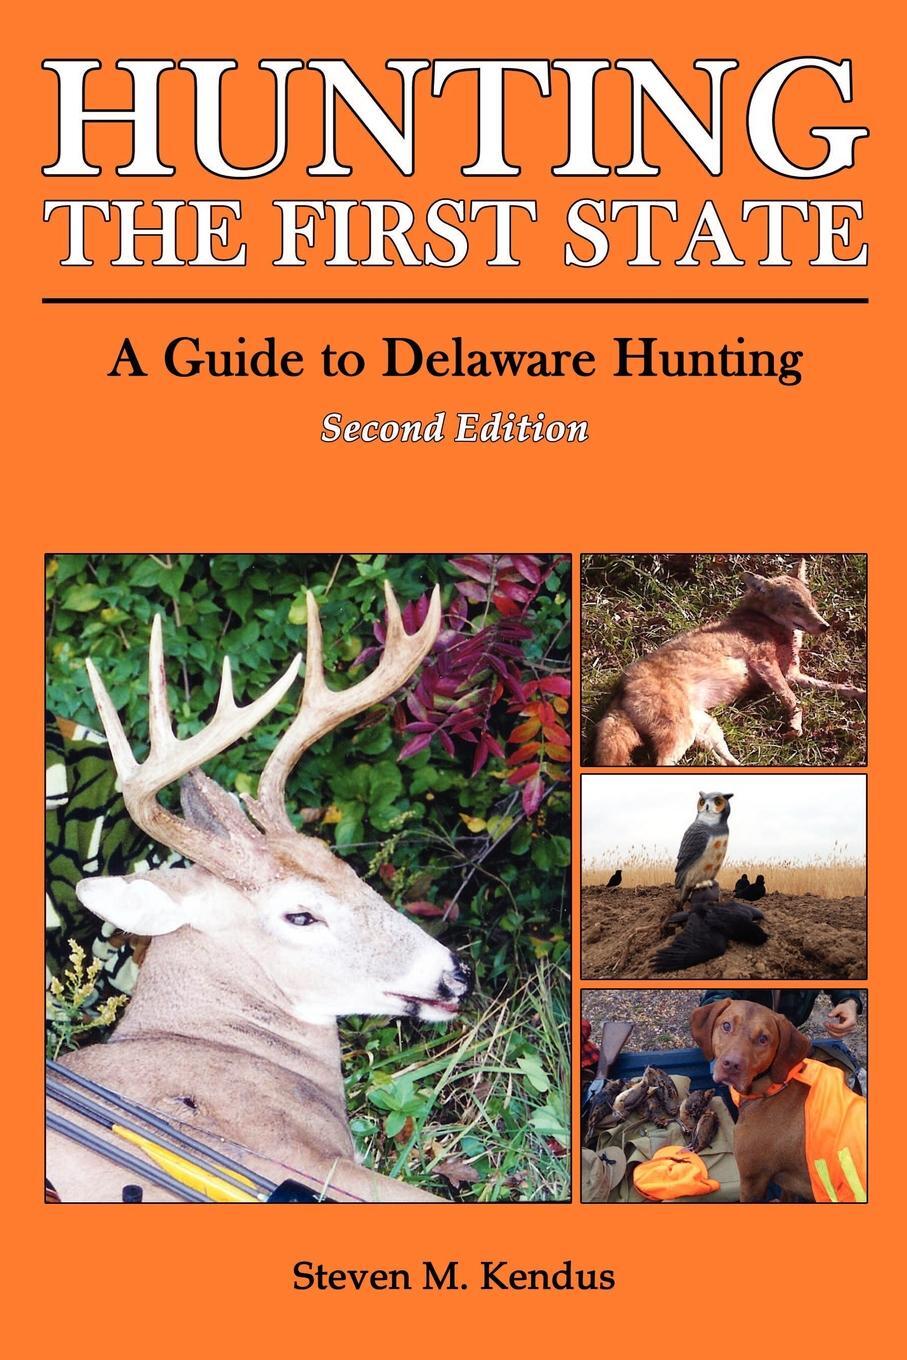 фото Hunting The First State. A Guide to Delaware Hunting - Second Edition